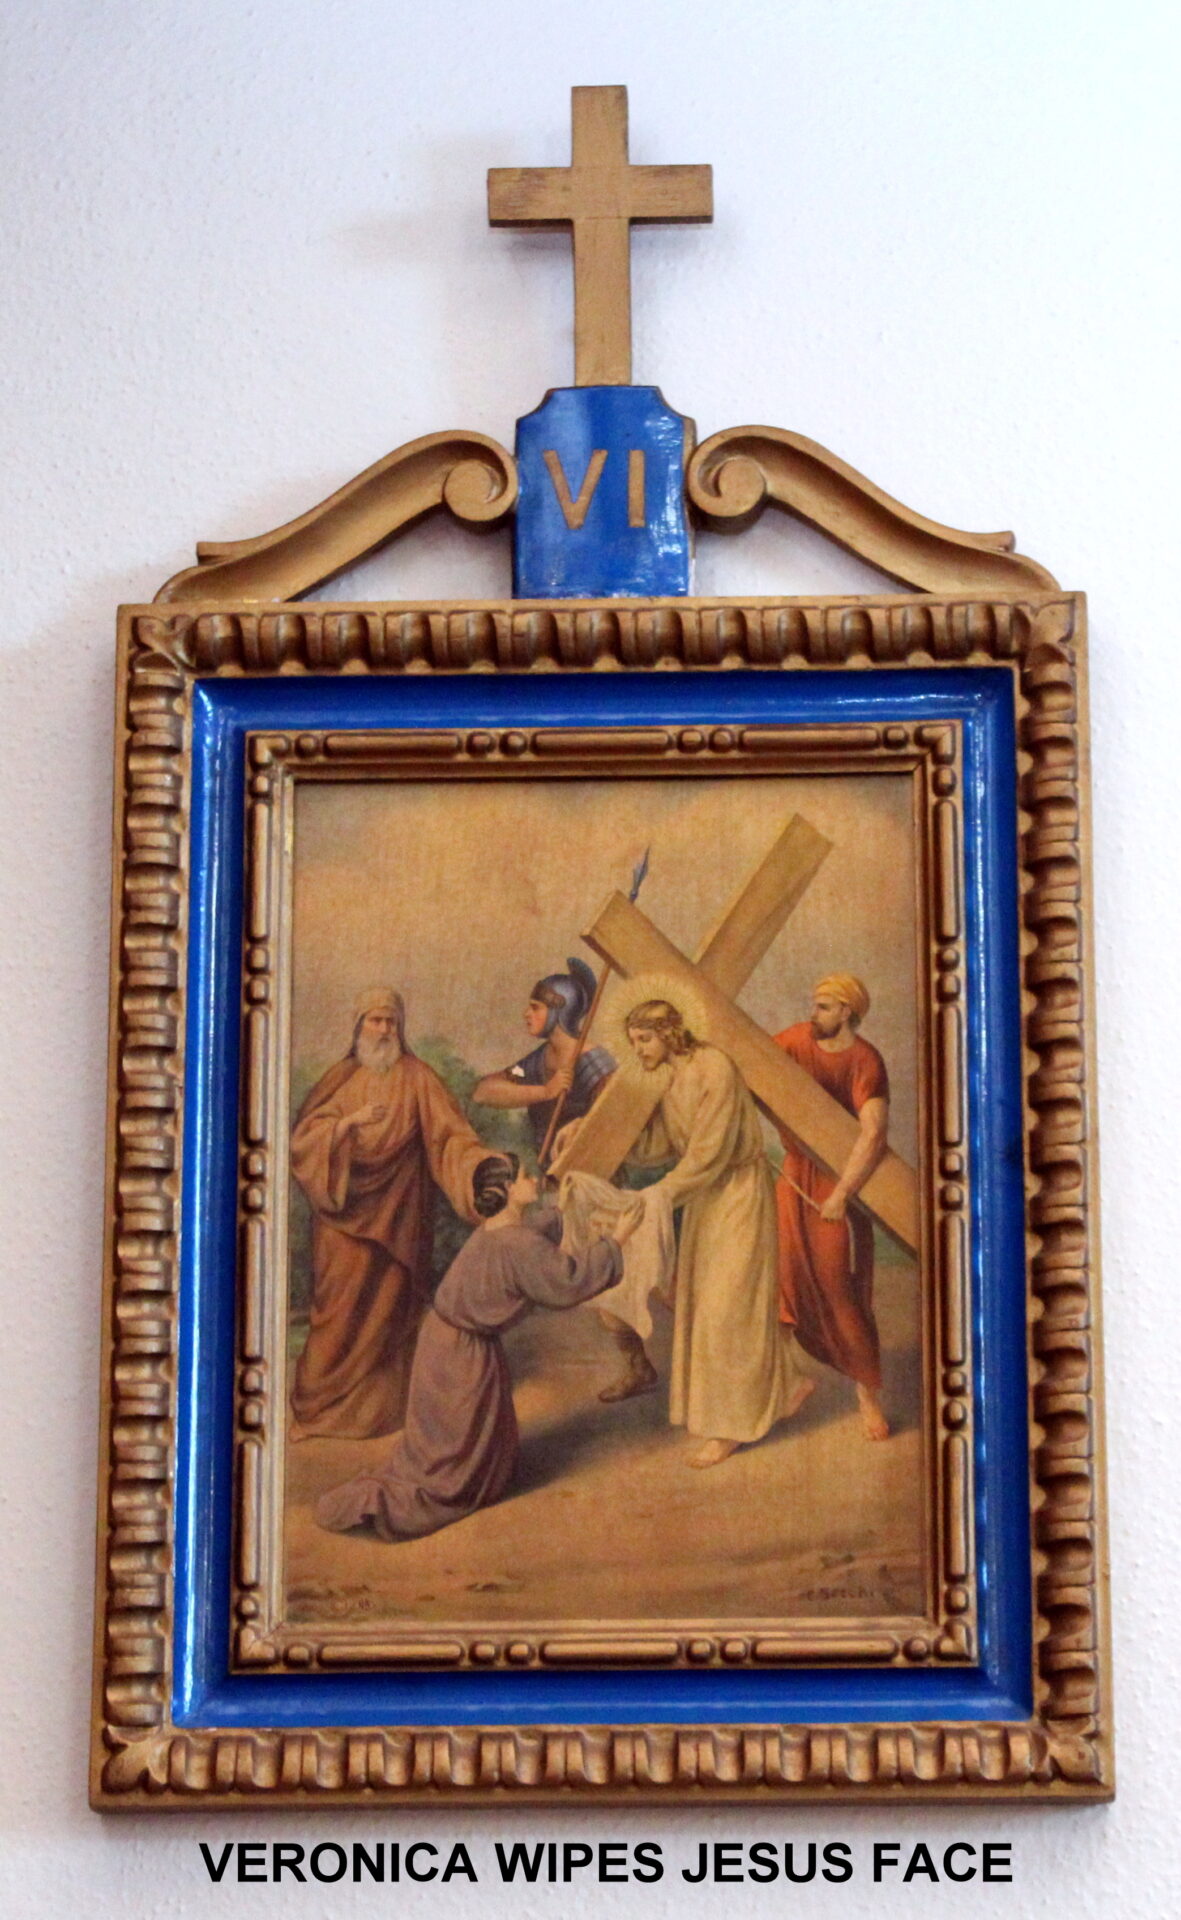 The sixth chapter of the station of the cross